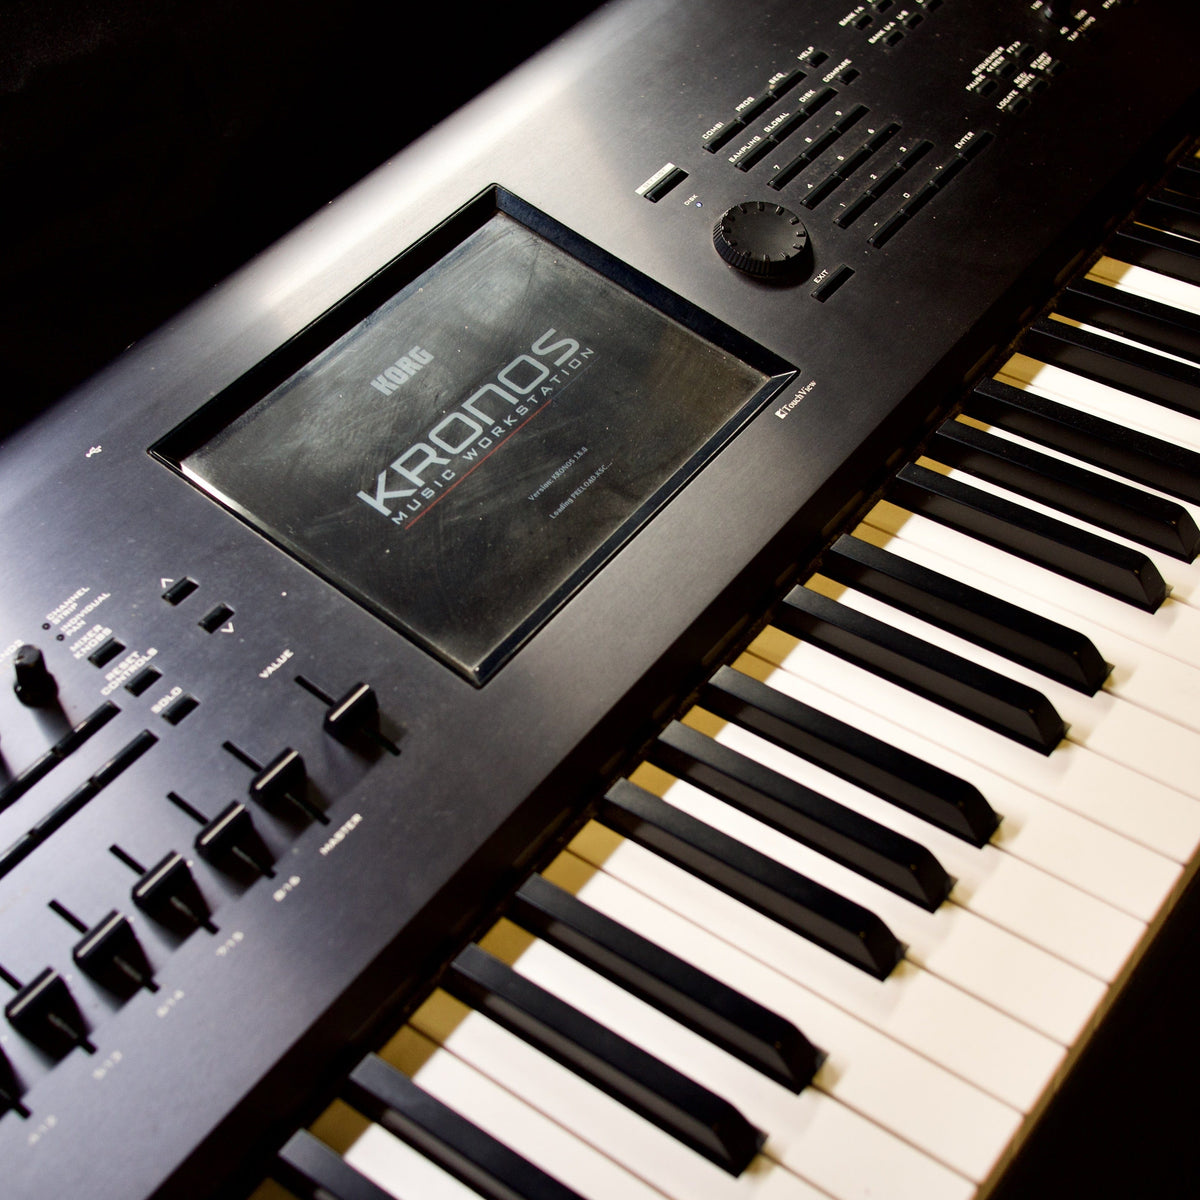 Byron Music Home Page Preloved - Korg Kronos V1 76 Weighted Key Synthesizer Keyboard - Byron Music